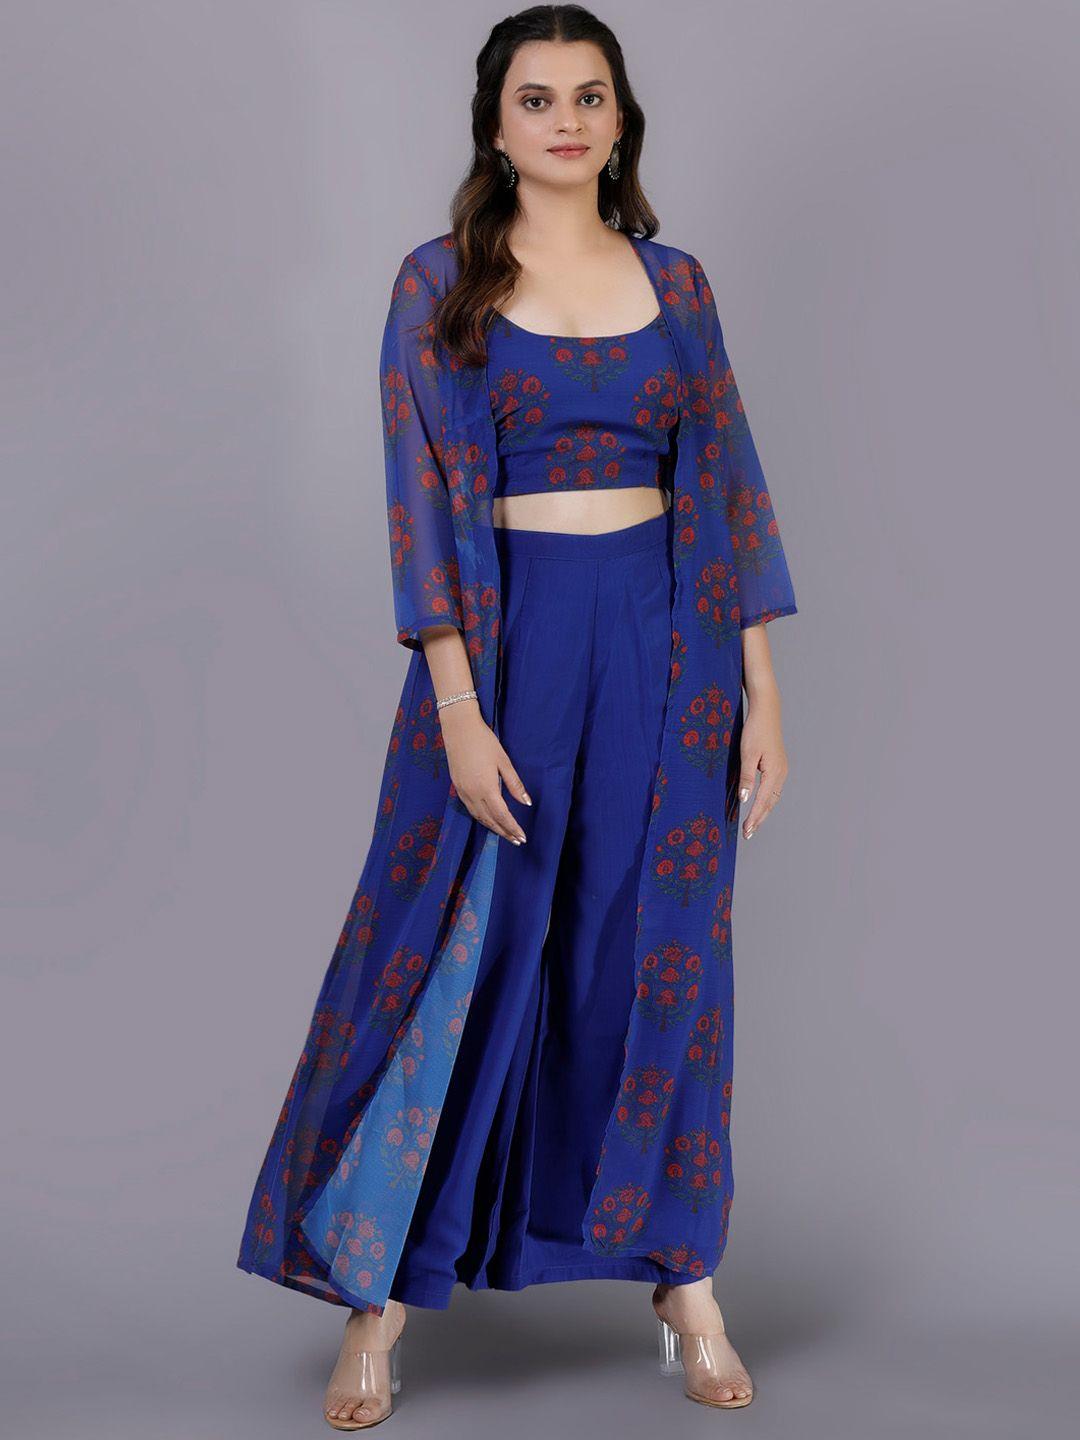 kalini-floral-printed-top-&-trouser-with-shrug